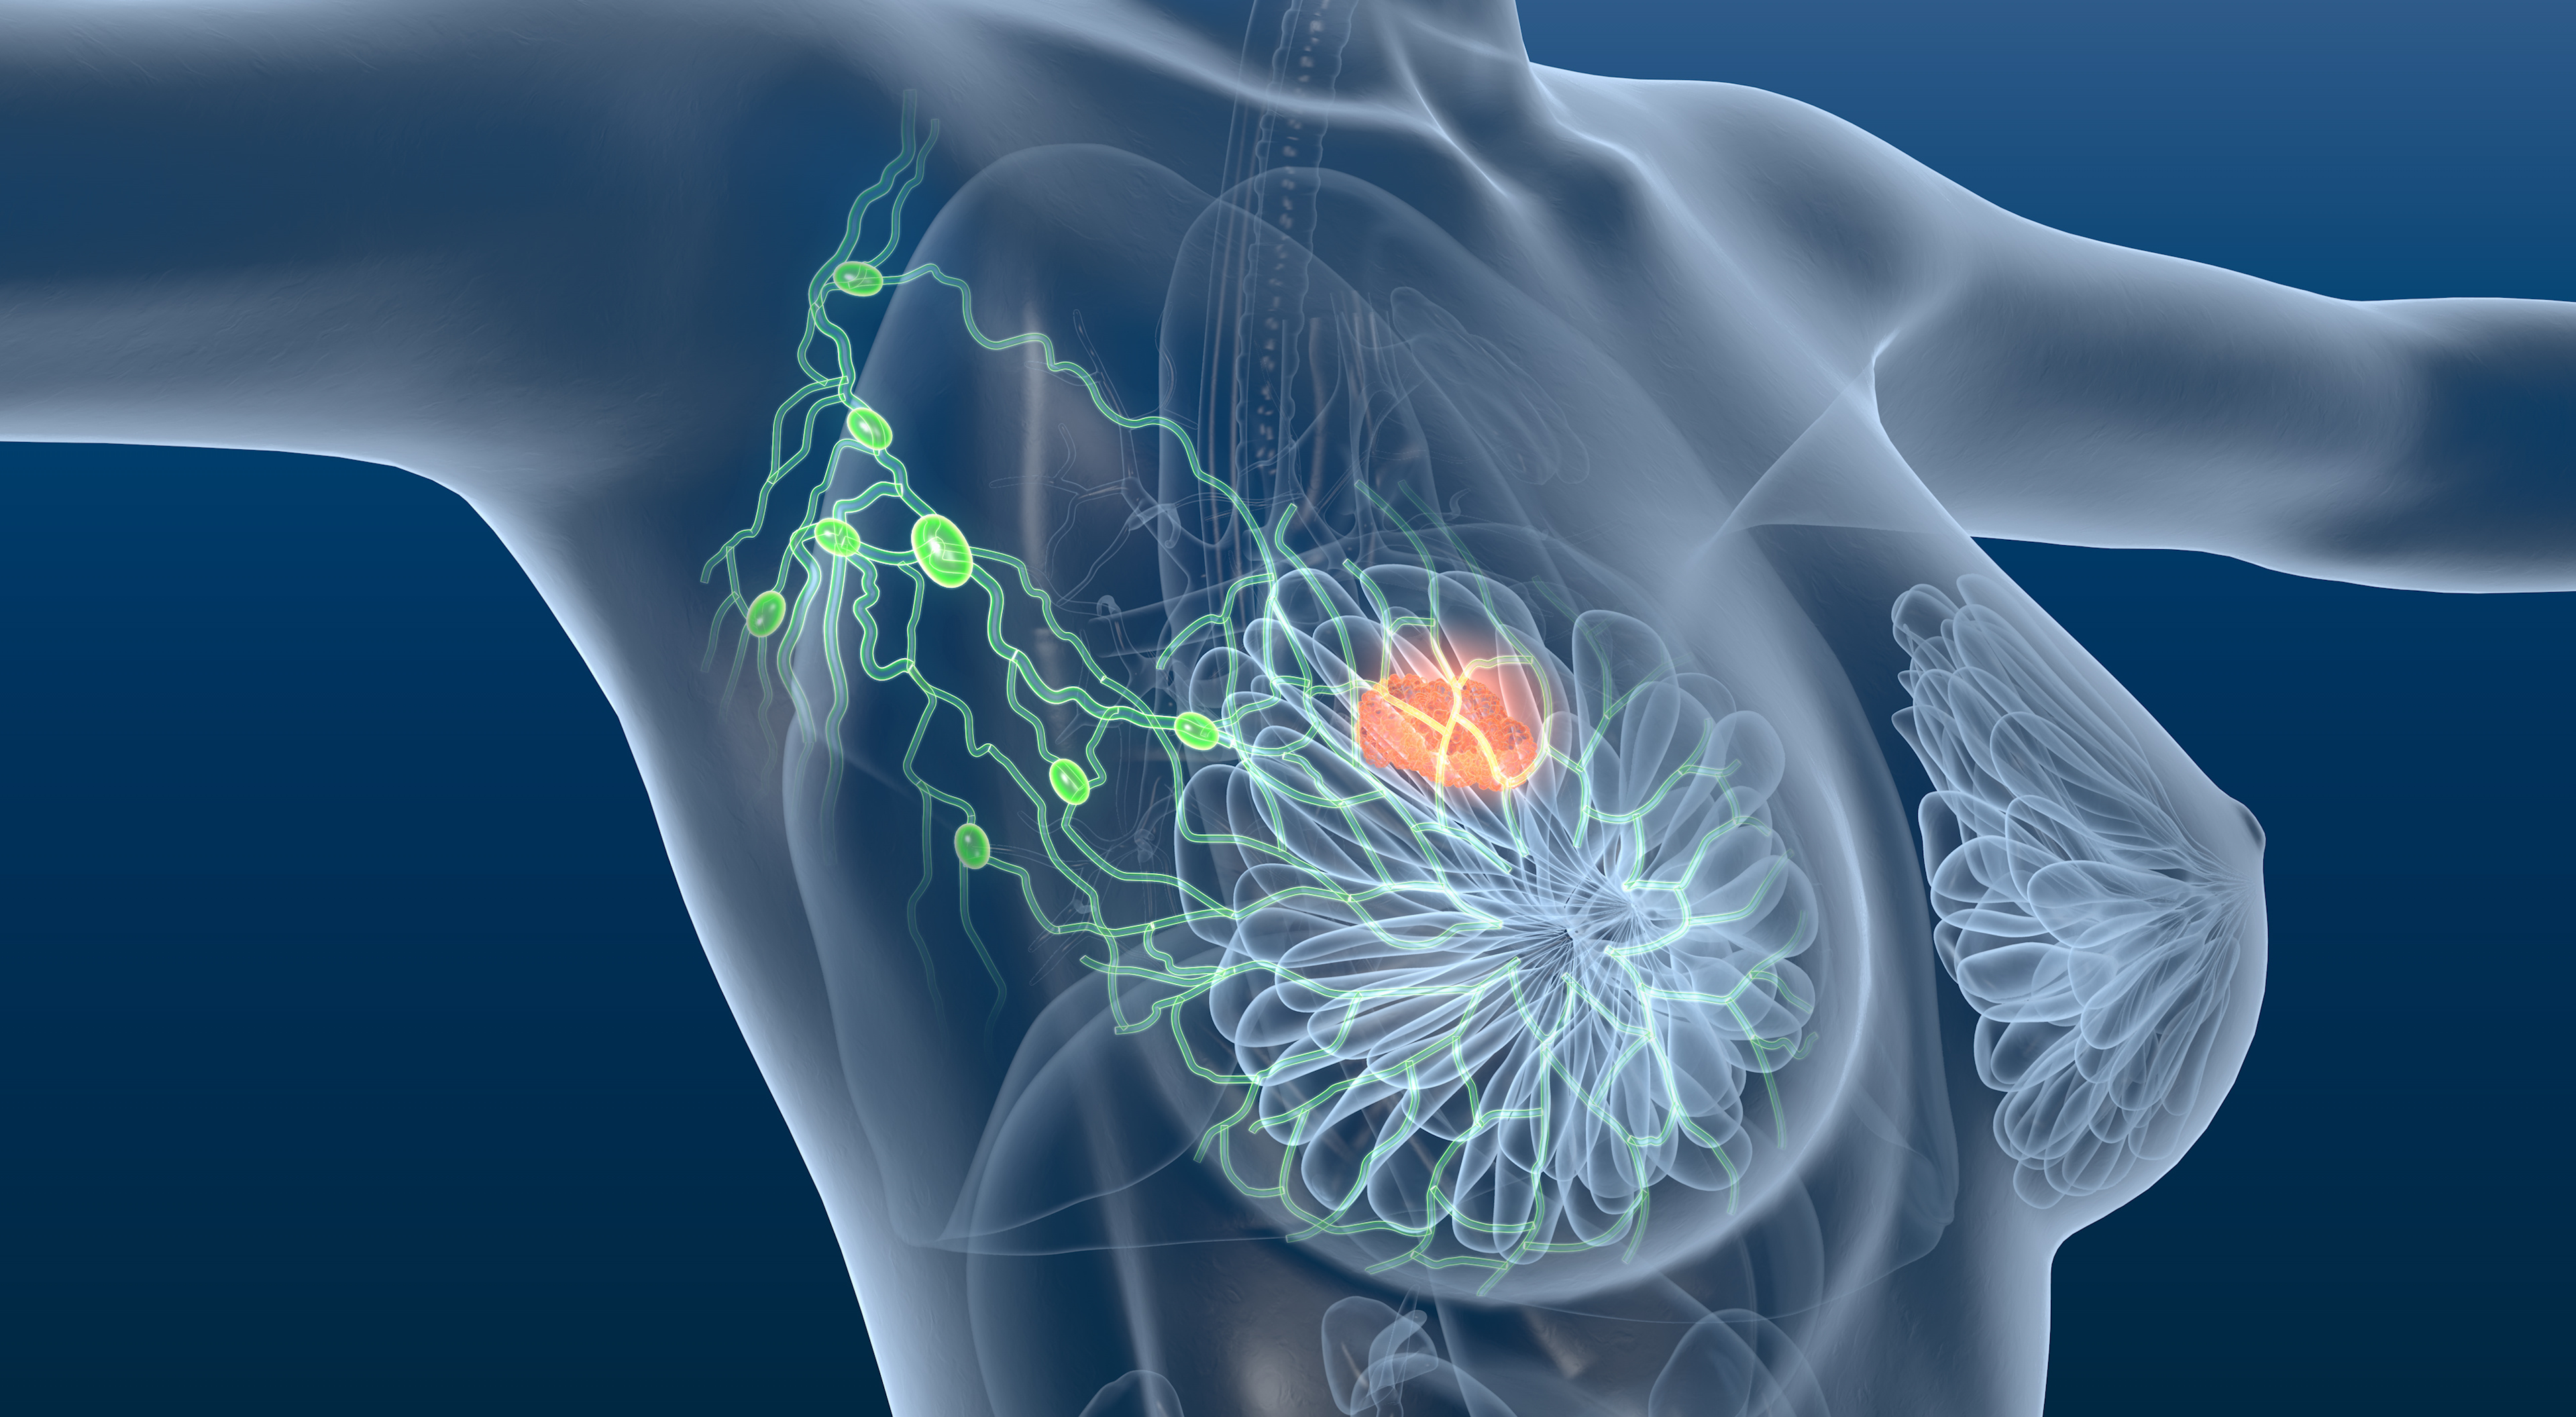 Patients With HR+/HER2- Advanced Breast Cancer May Reduce Ribociclib Dose Without Jeopardizing Outcomes